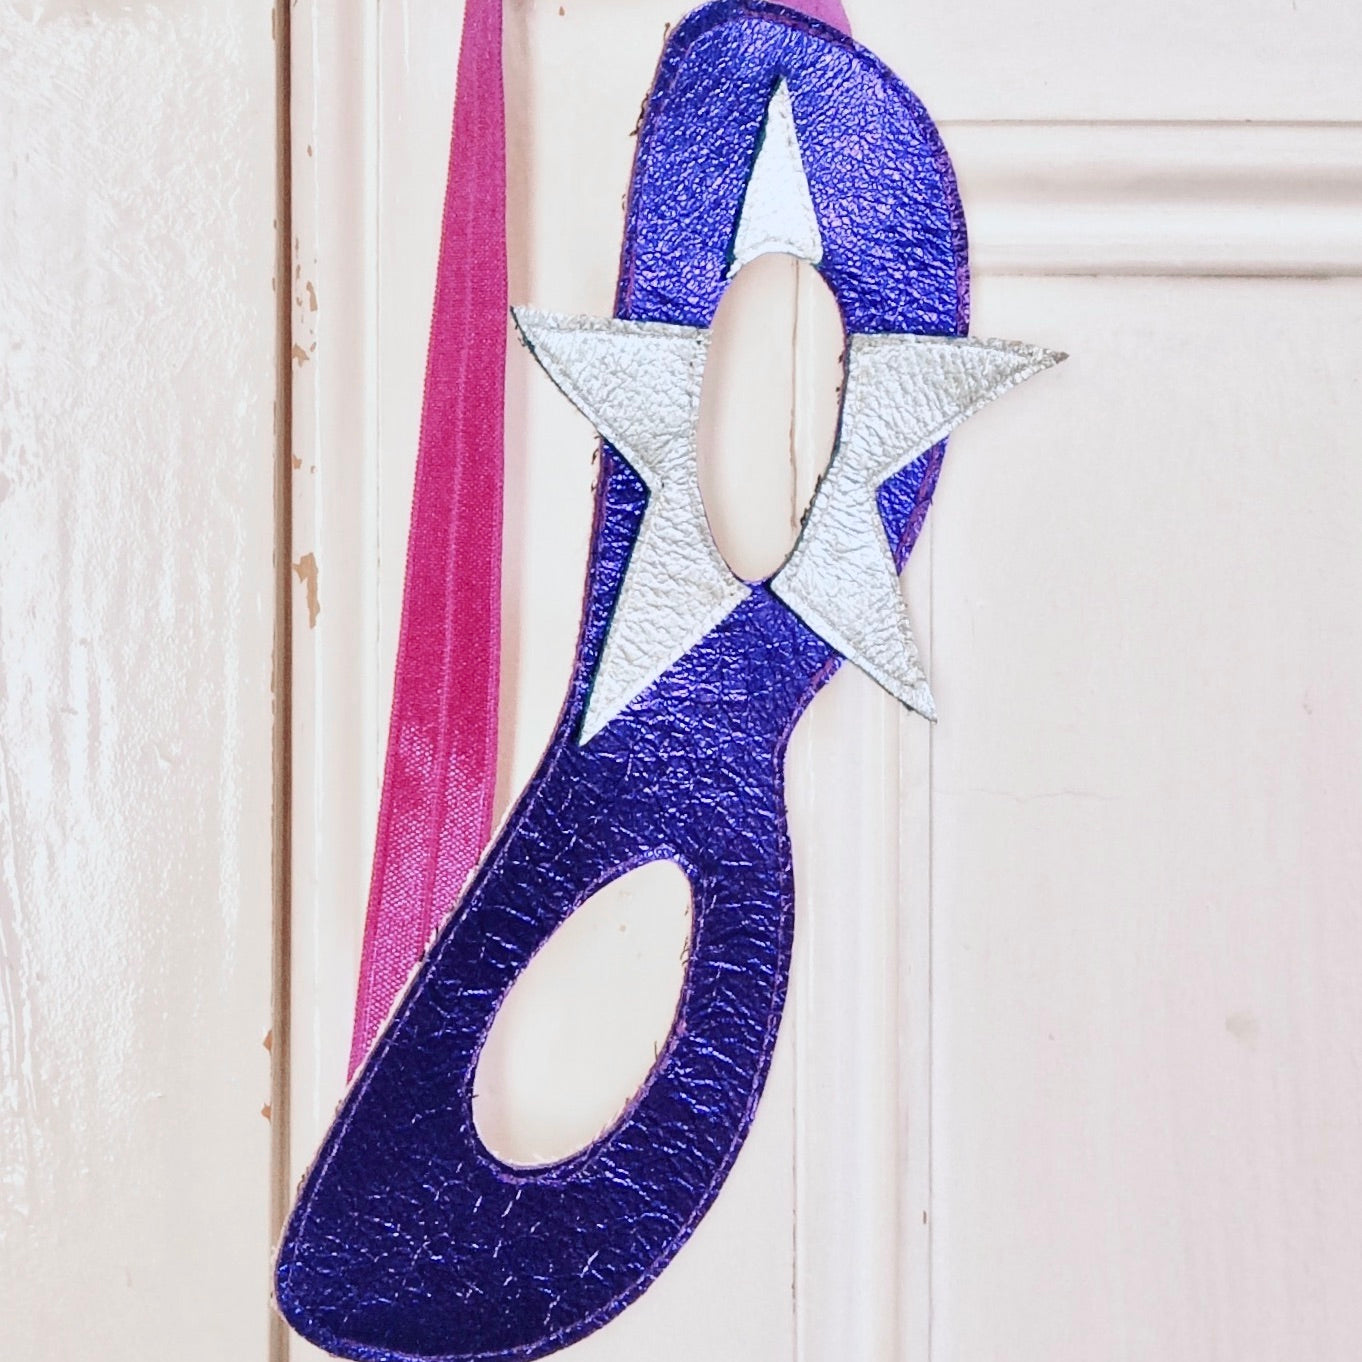 Metallic leather Star superhero mask by For Just ONE Day